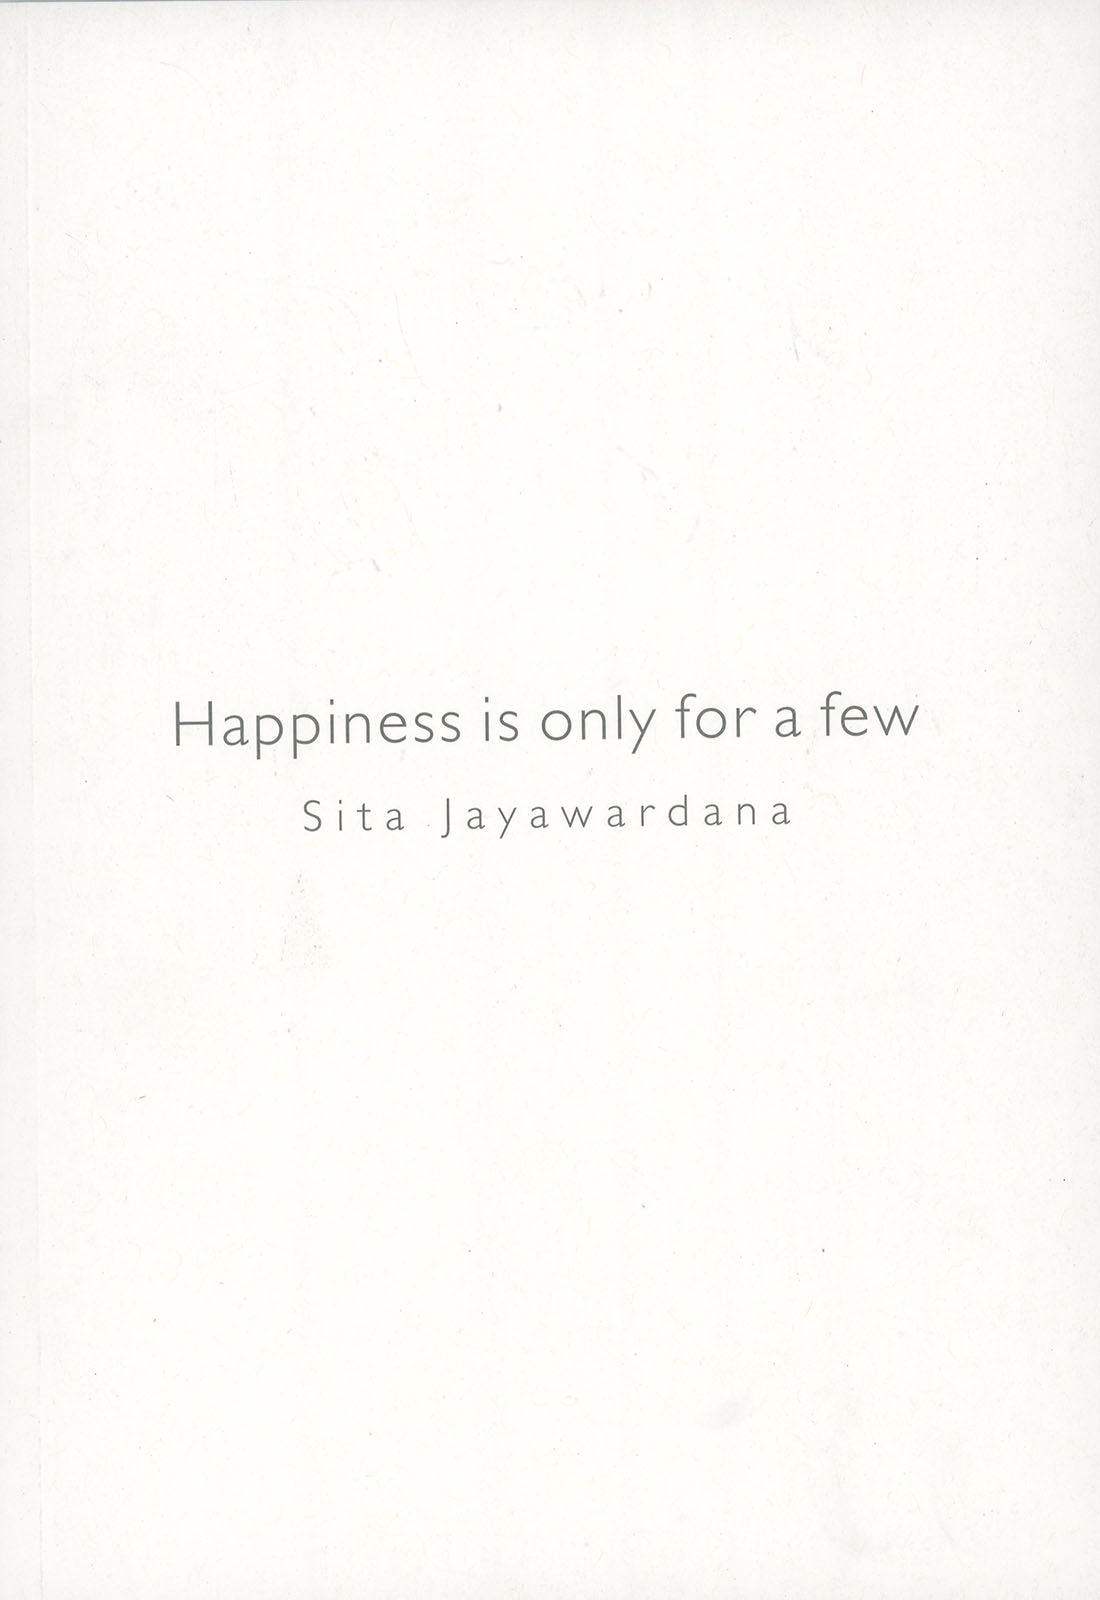 Happiness is Only for a Few by Sita Jayawardana